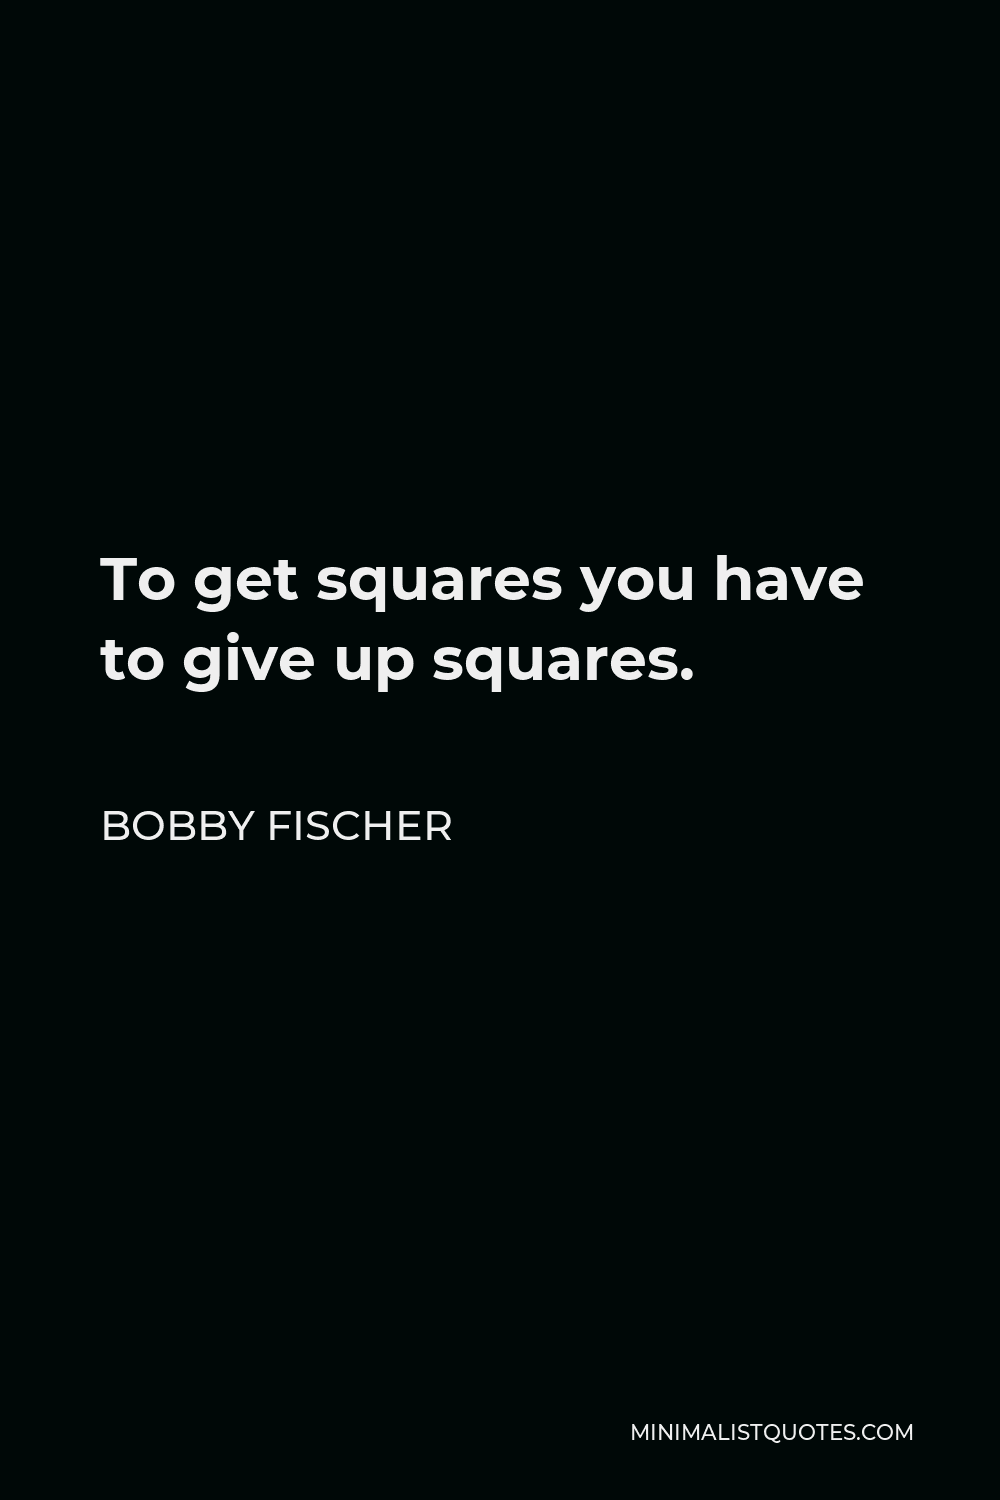 Bobby Fischer Quote - To get squares you have to give up squares.